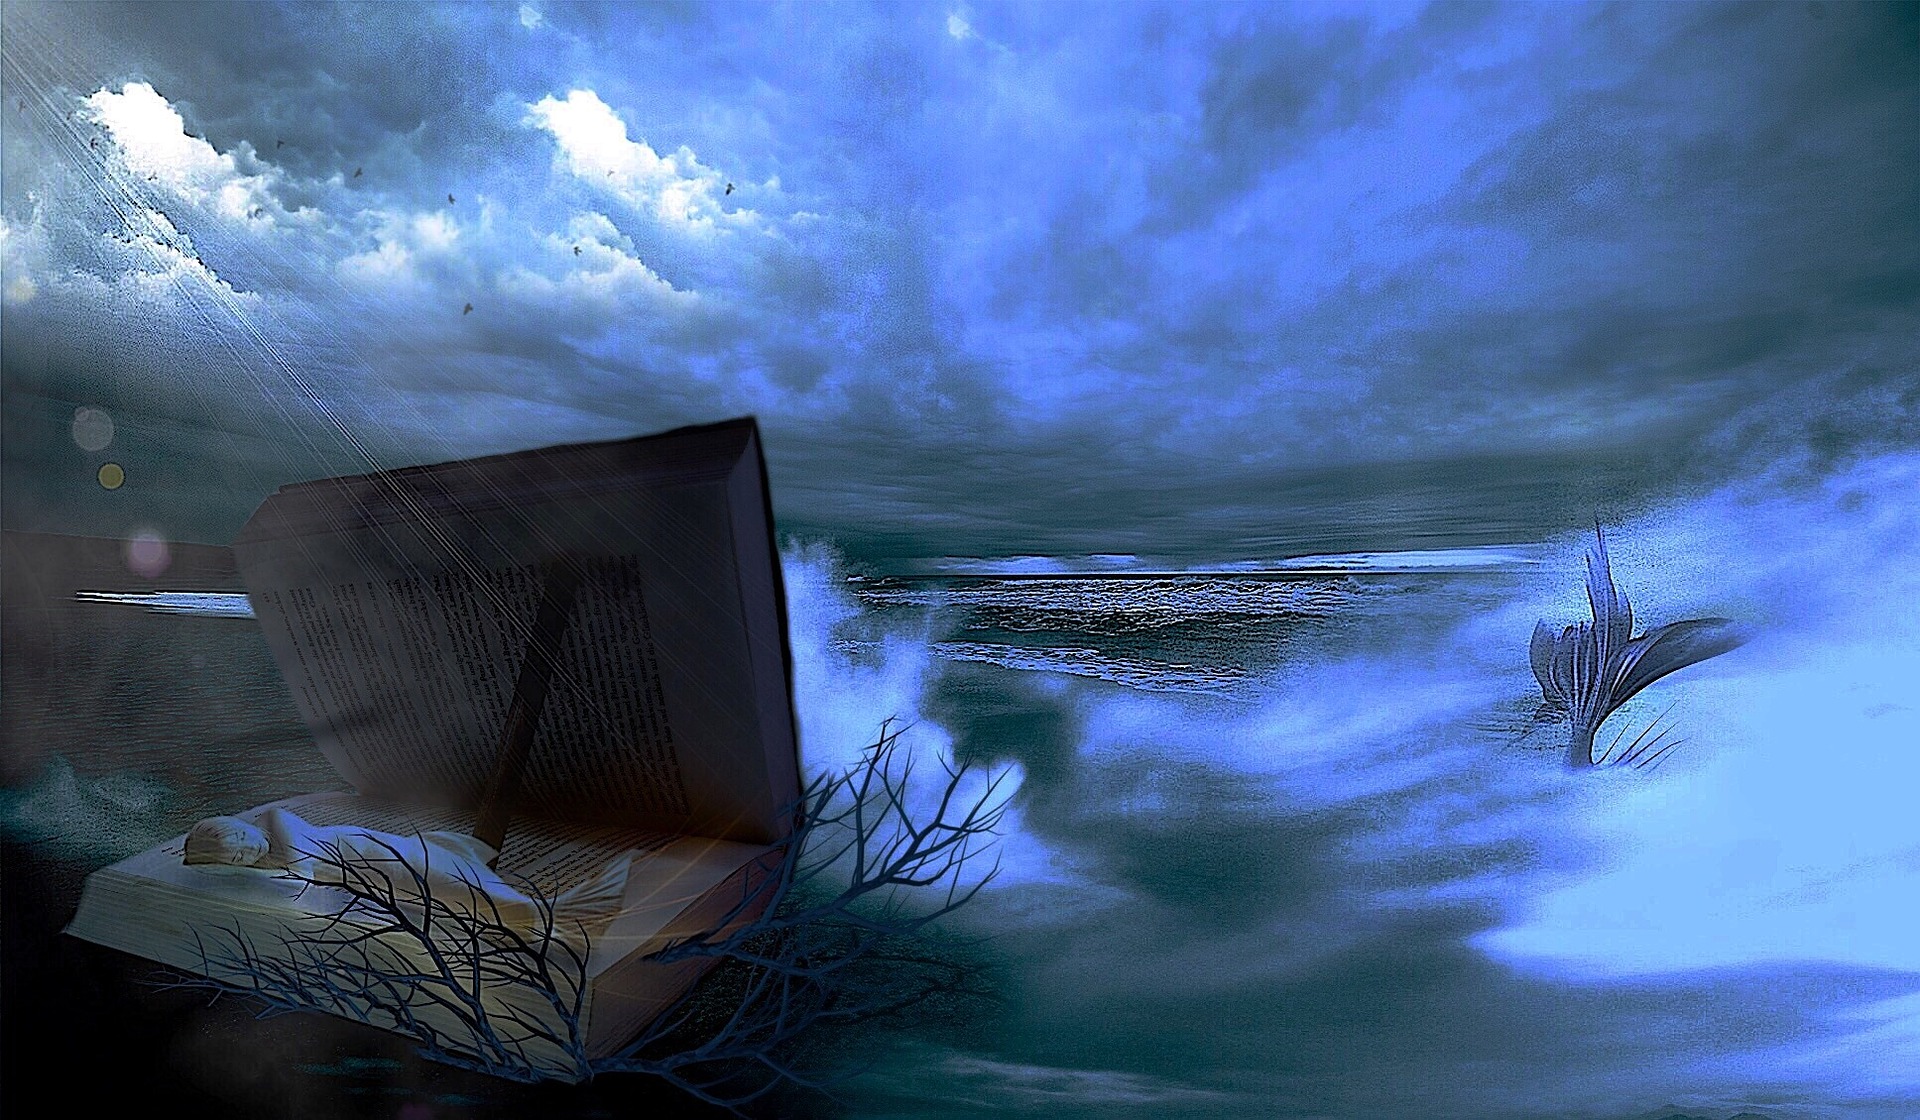 A seascape fantasy image. A beautiful violet-blue permeates the image. A lively sea in which a mermaid swims. A huge book is open near the shore, in which another mermaid rests. There is a blanket of low cloud cover, through which the light pierces in a few places.